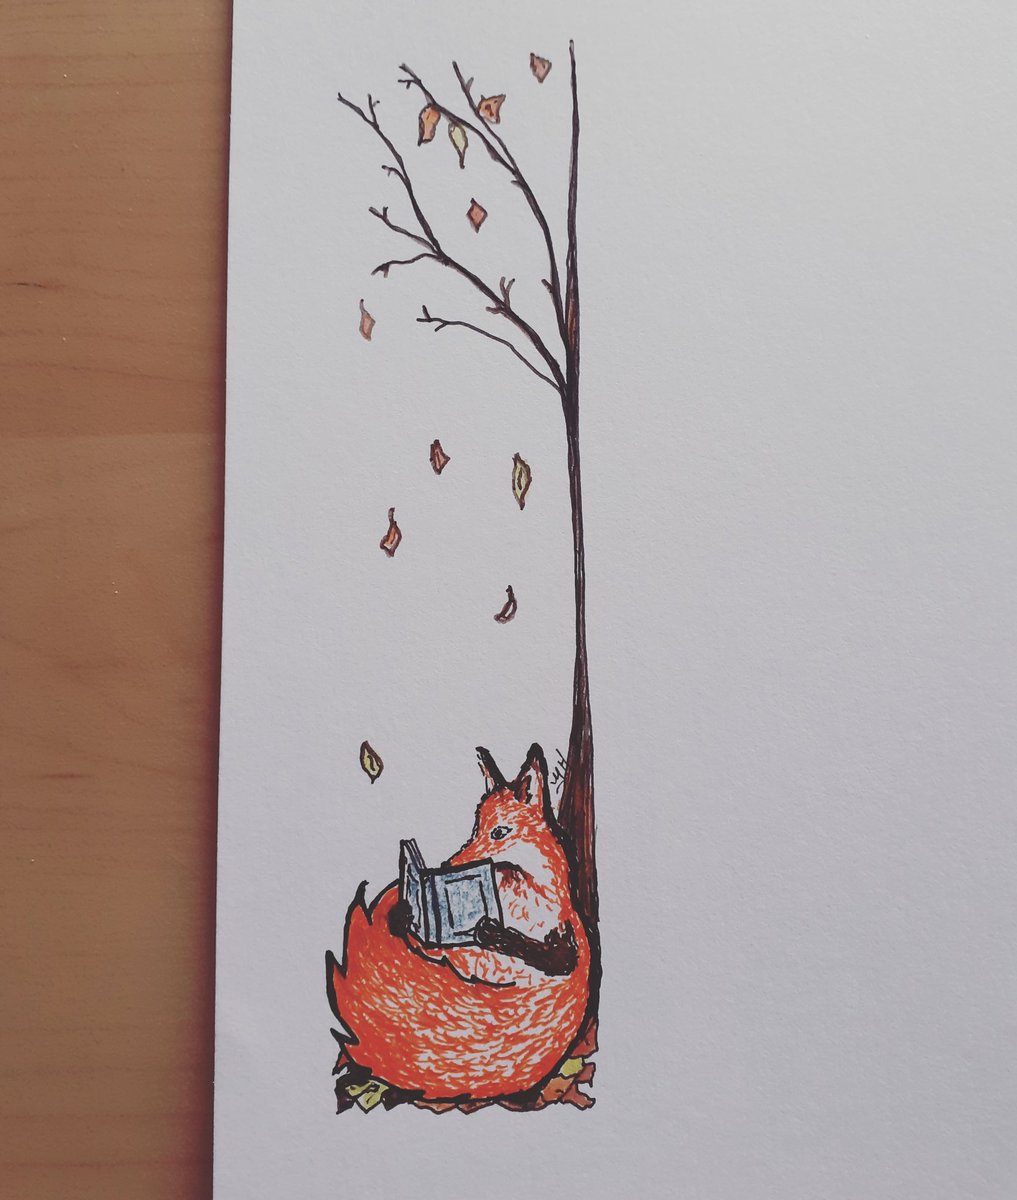 #inktober day 14. Trying out ideas for bookmarks. Fox curled up with a book. It's a #workinprogress idea. #bookmarks #curlupwithagoodbook #inktober2020 #edinburgh #localartist